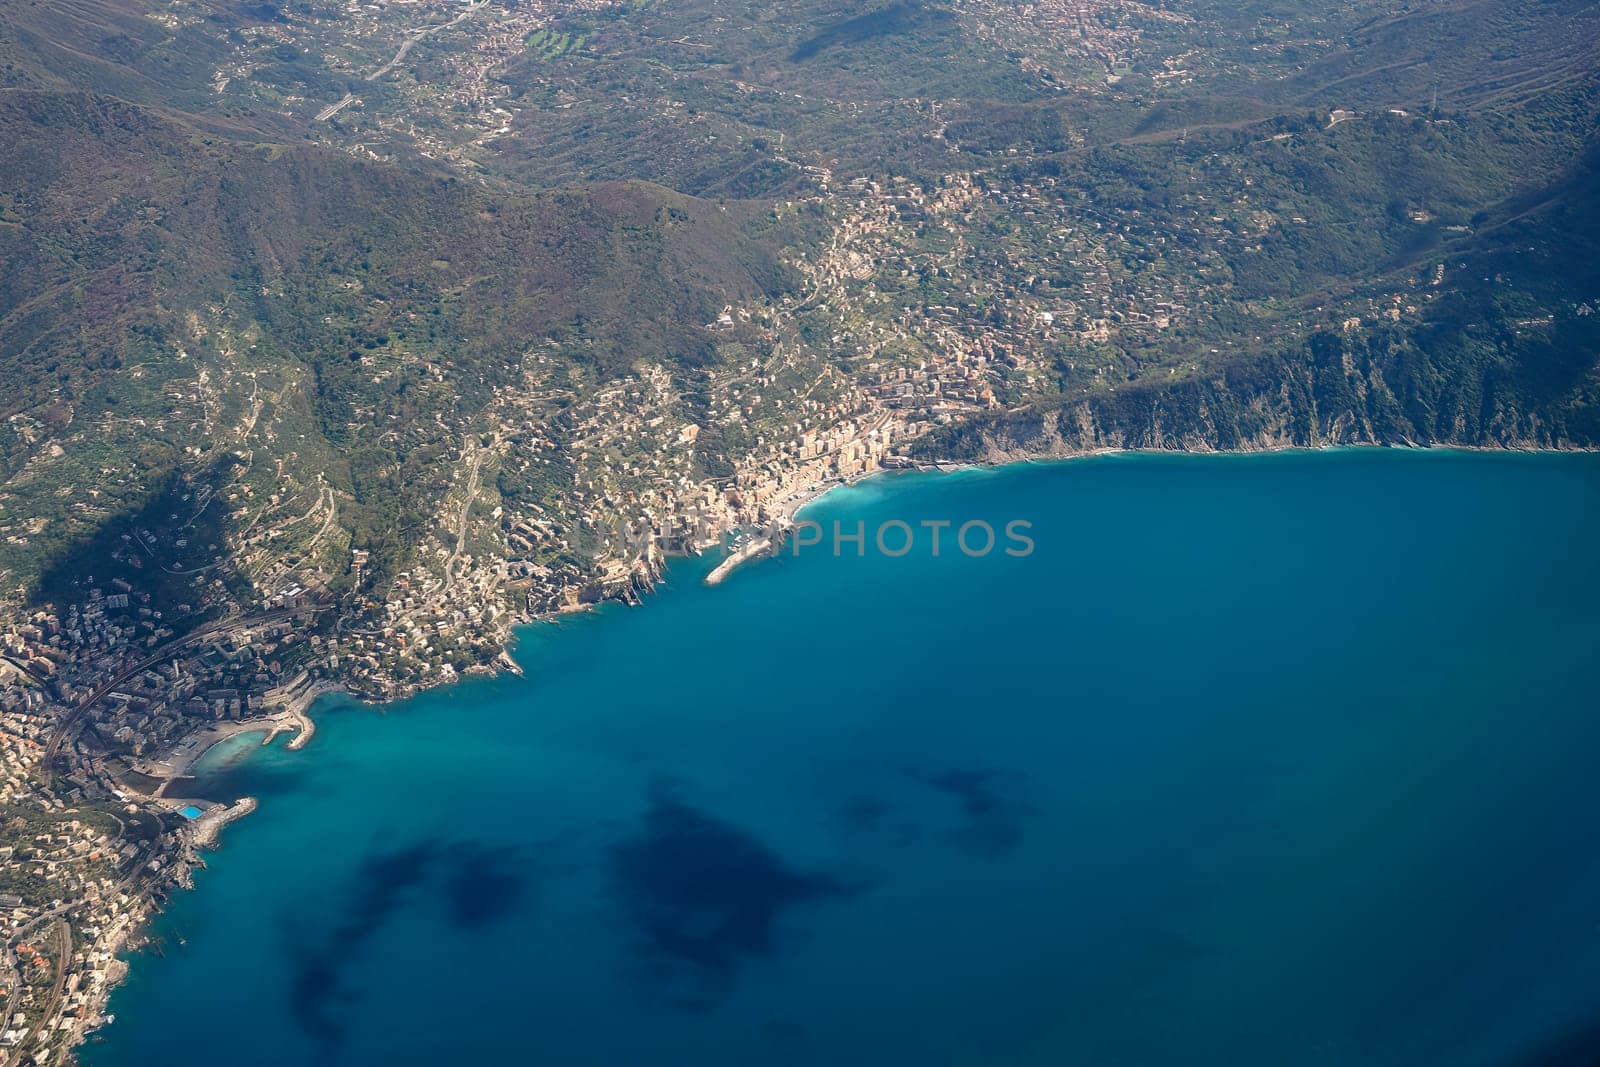 Camogli village in The Natural Park of Portofino, Liguria, Italy. aerial view from airplane before landing in Genoa